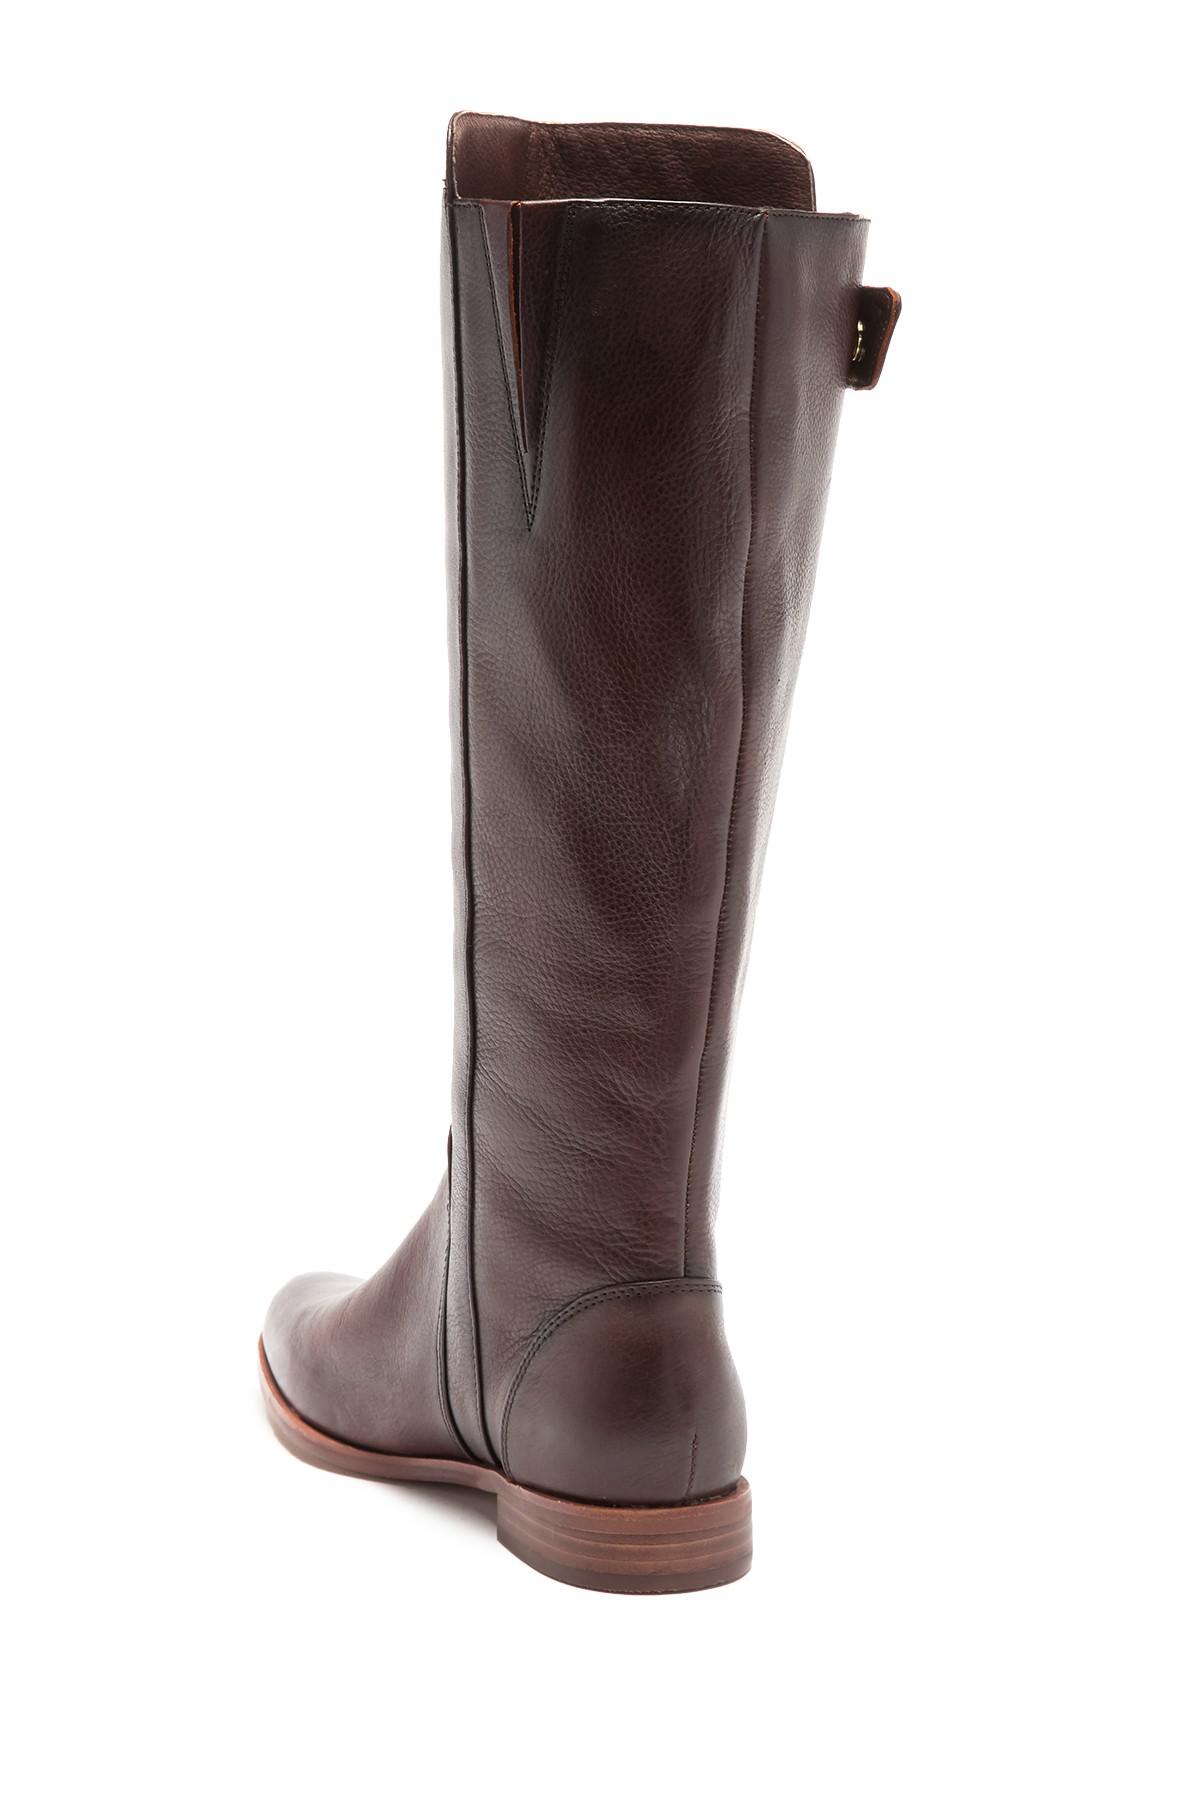 Isola Leather Melino Riding Boot in 